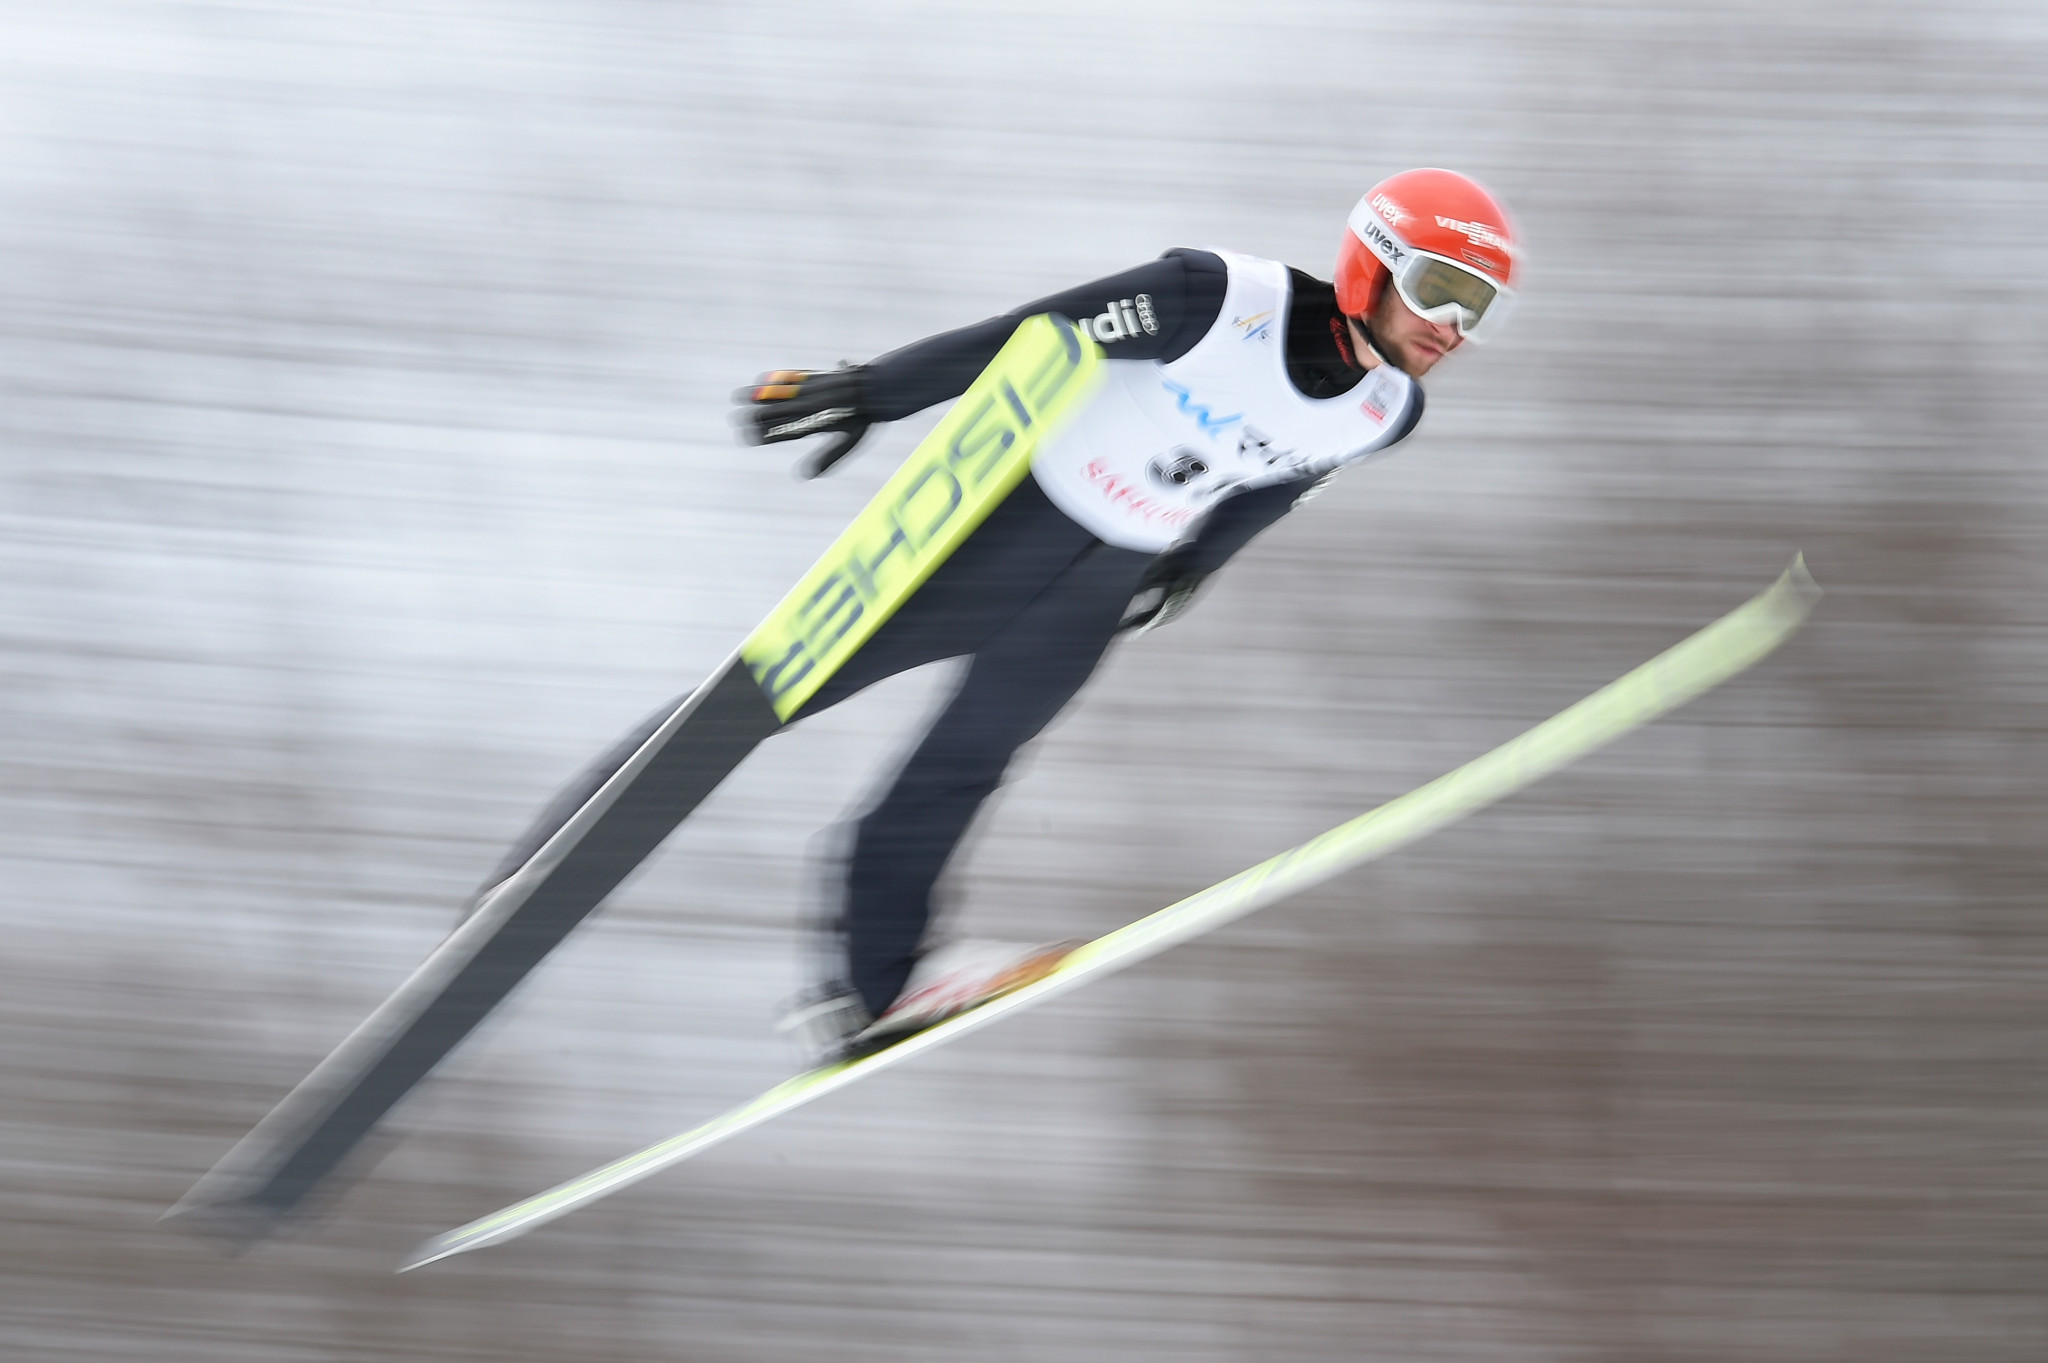 Markus Eisenbichler started the FIS Ski Jumping World Cup season with victory in Wisla ©Getty Images